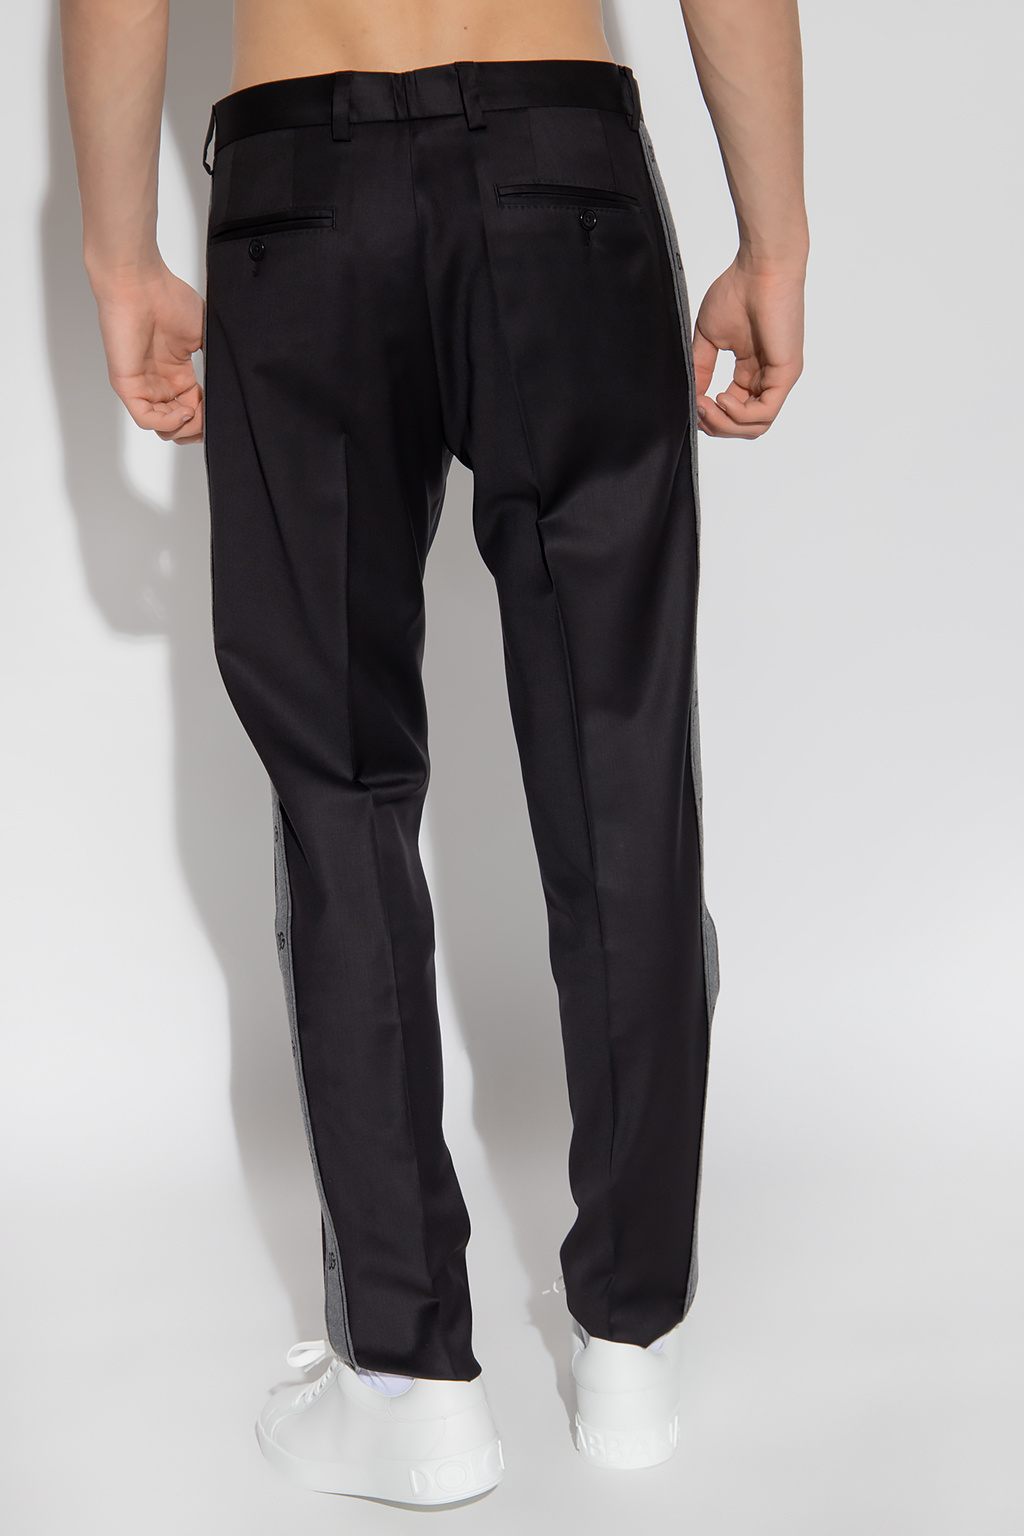 Dolce & Gabbana Pleat-front trousers check with side panels